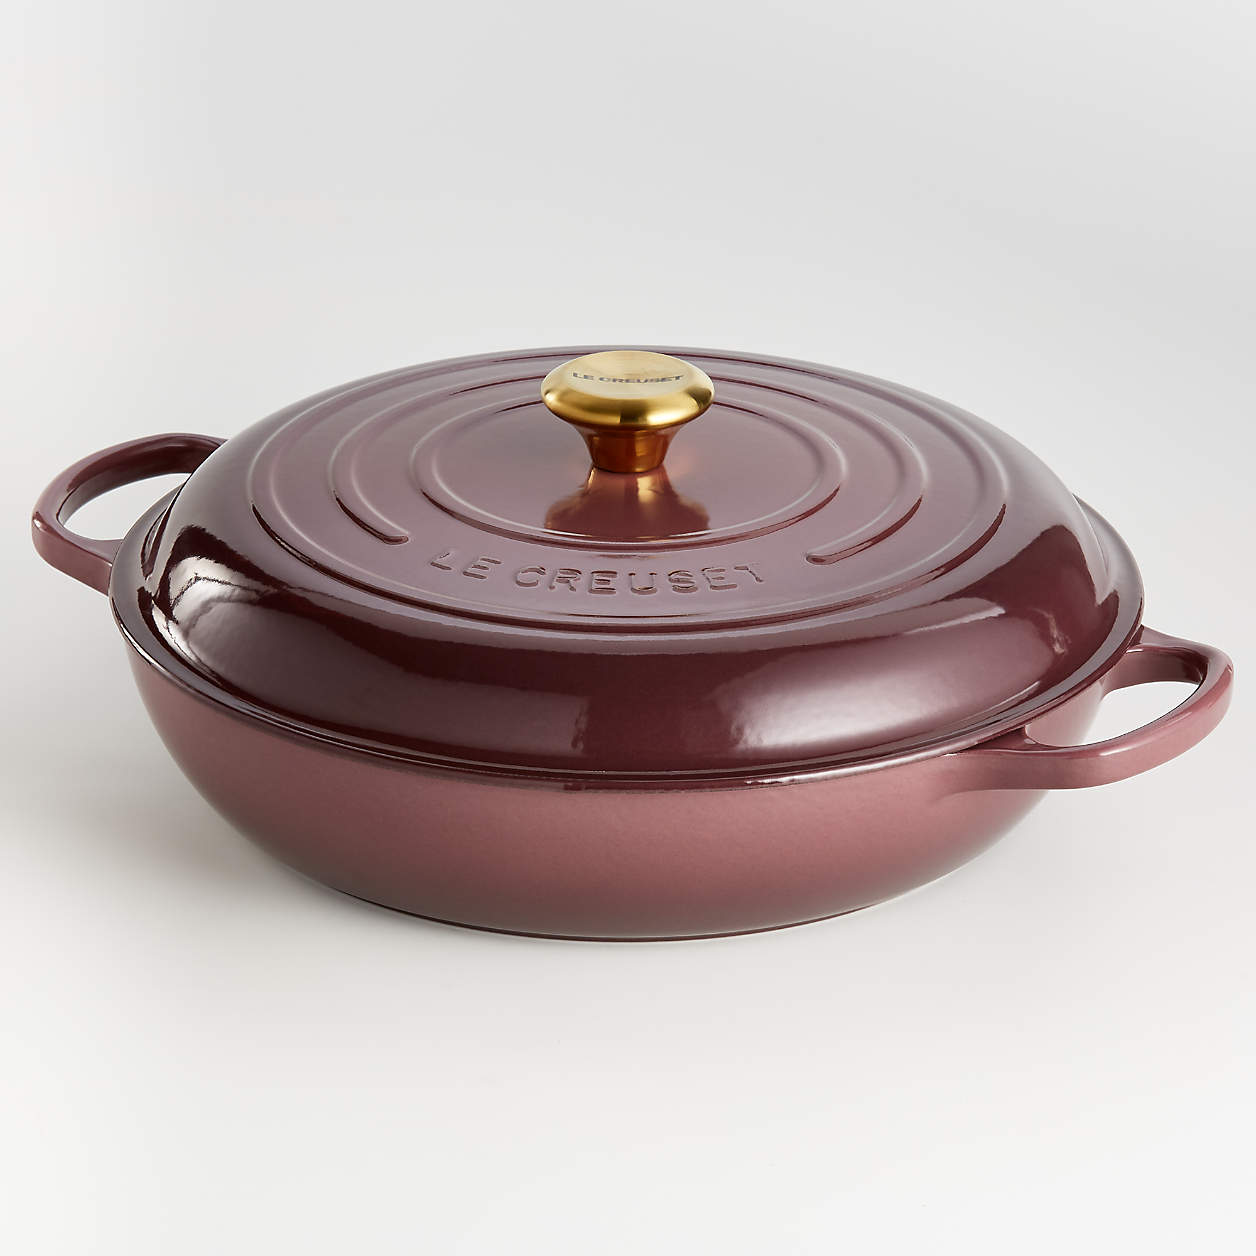 Le Creuset Everyday Pan - www.inf-inet.com